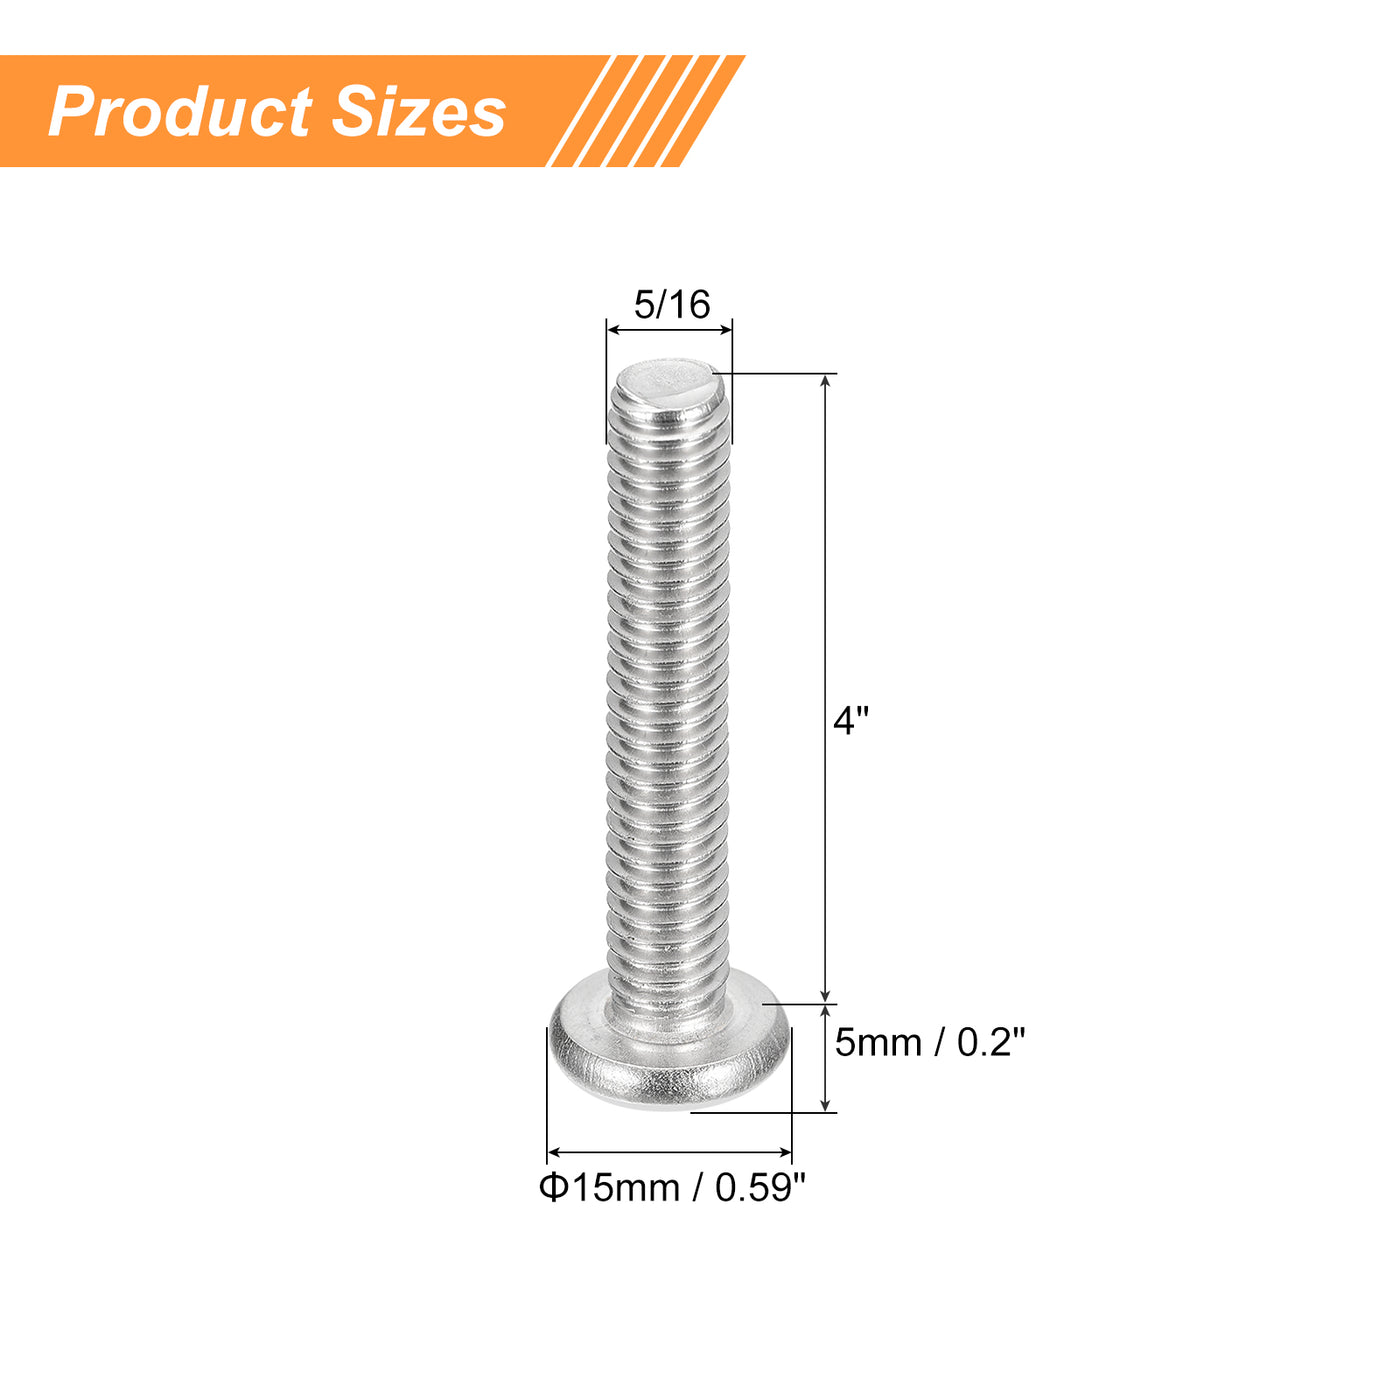 uxcell Uxcell 5/16-18x4" Pan Head Machine Screws, Stainless Steel 18-8 Screw, Pack of 5